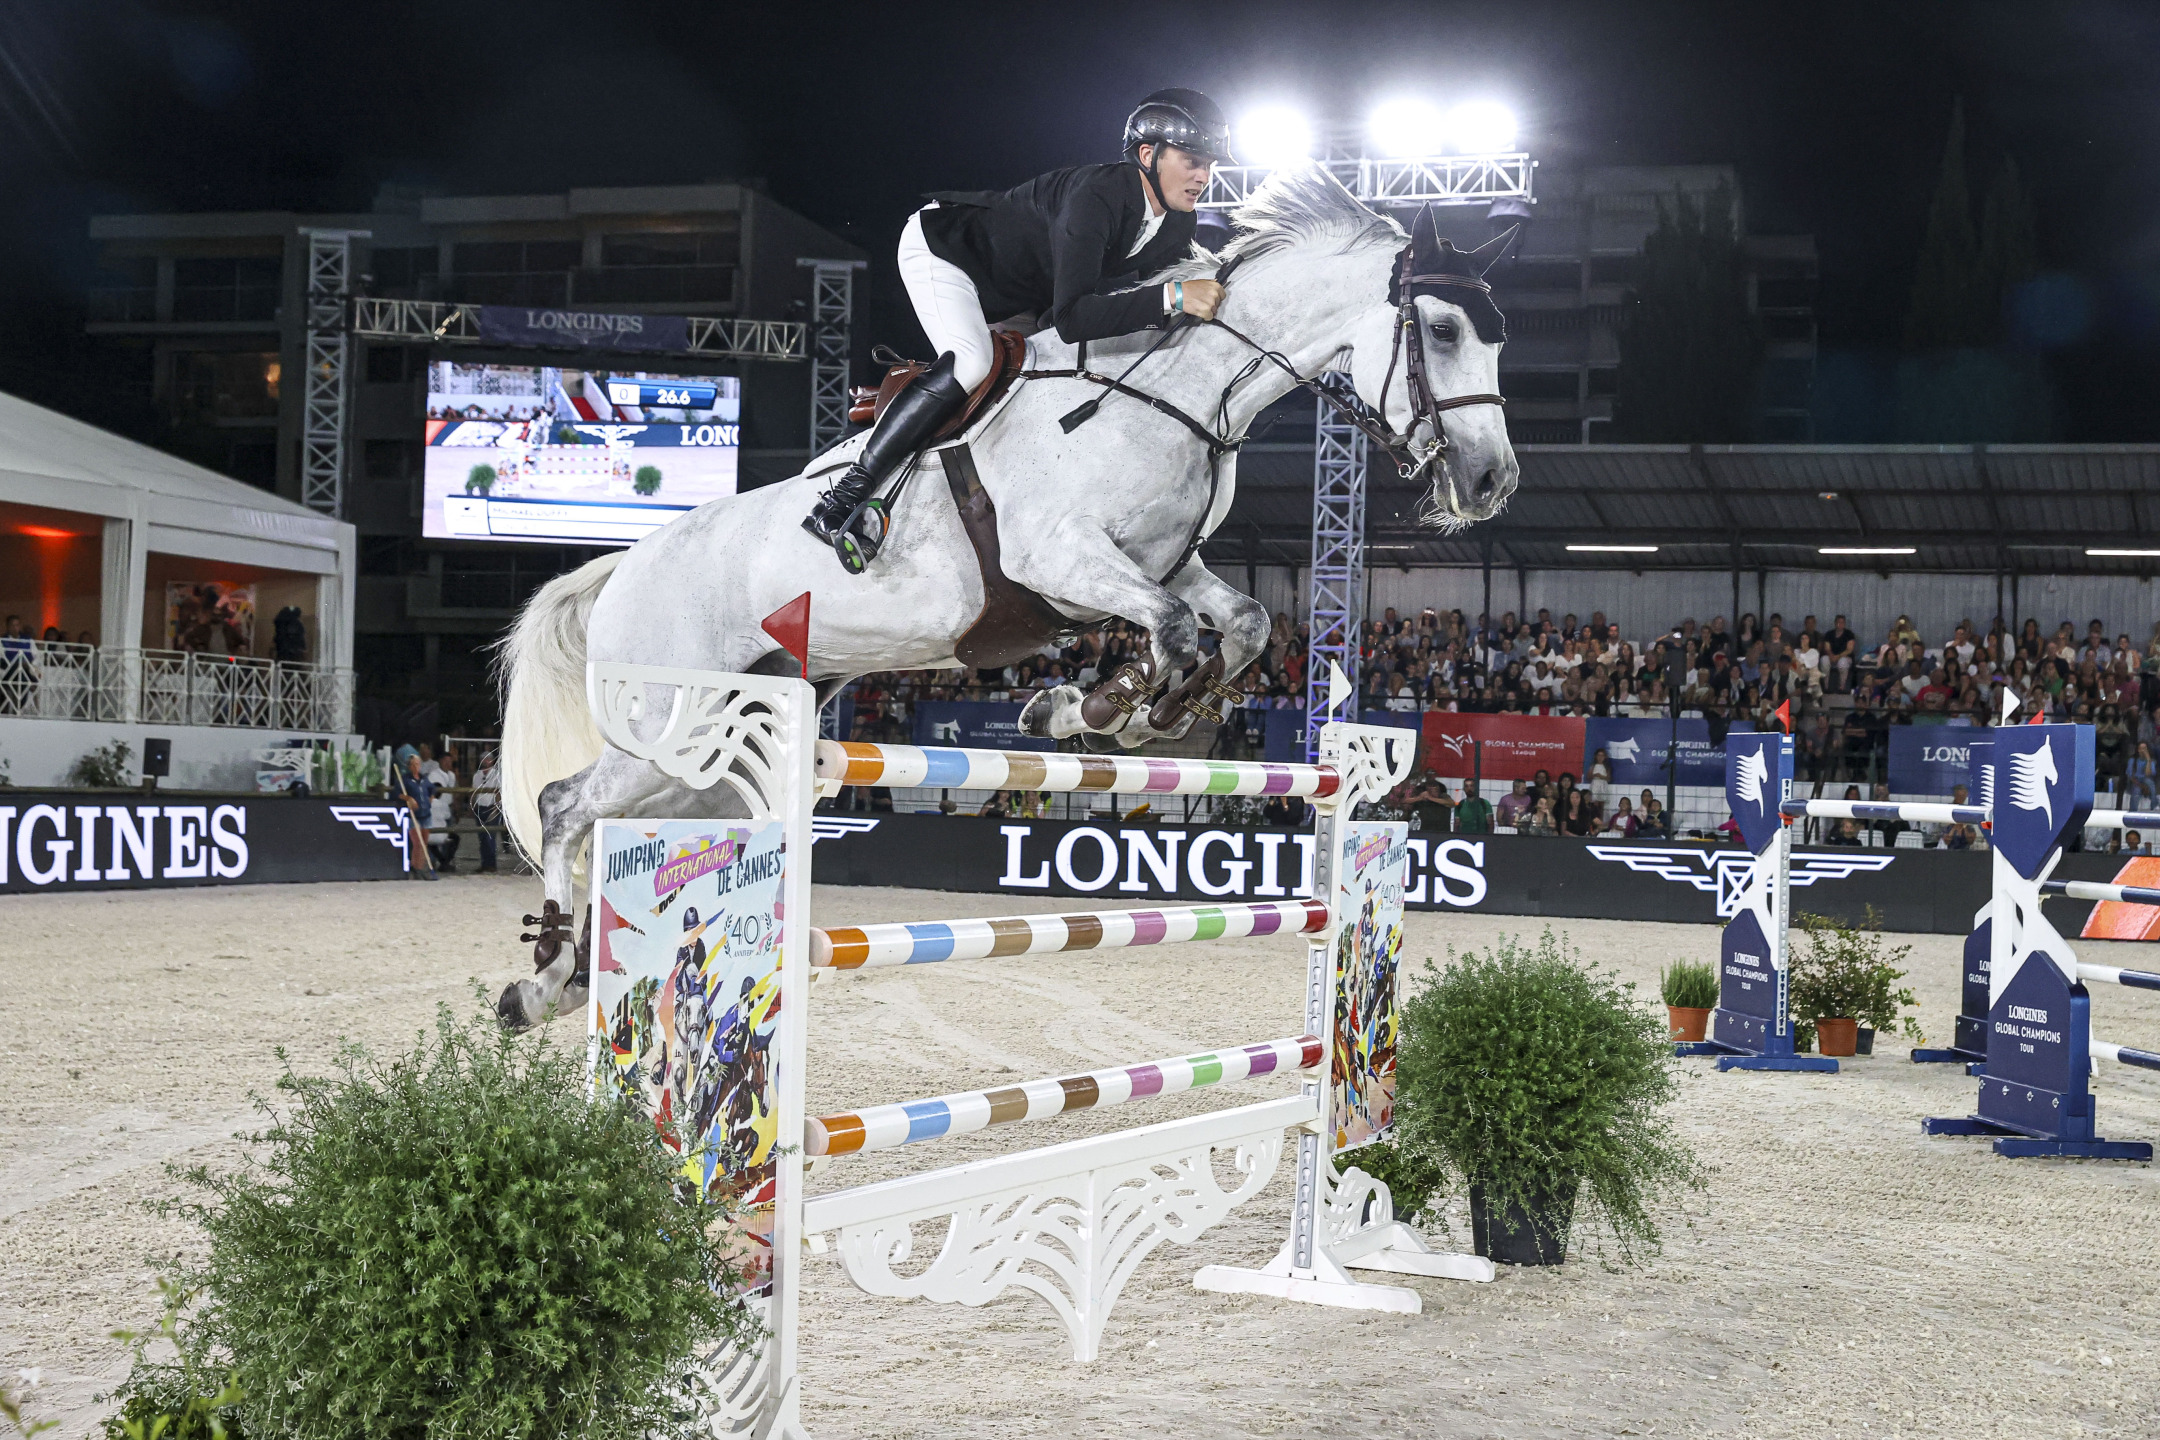 Michael Duffy on Cinca 3 during LGCT of Cannes where he obtained the third position in the LGCT Grand Prix